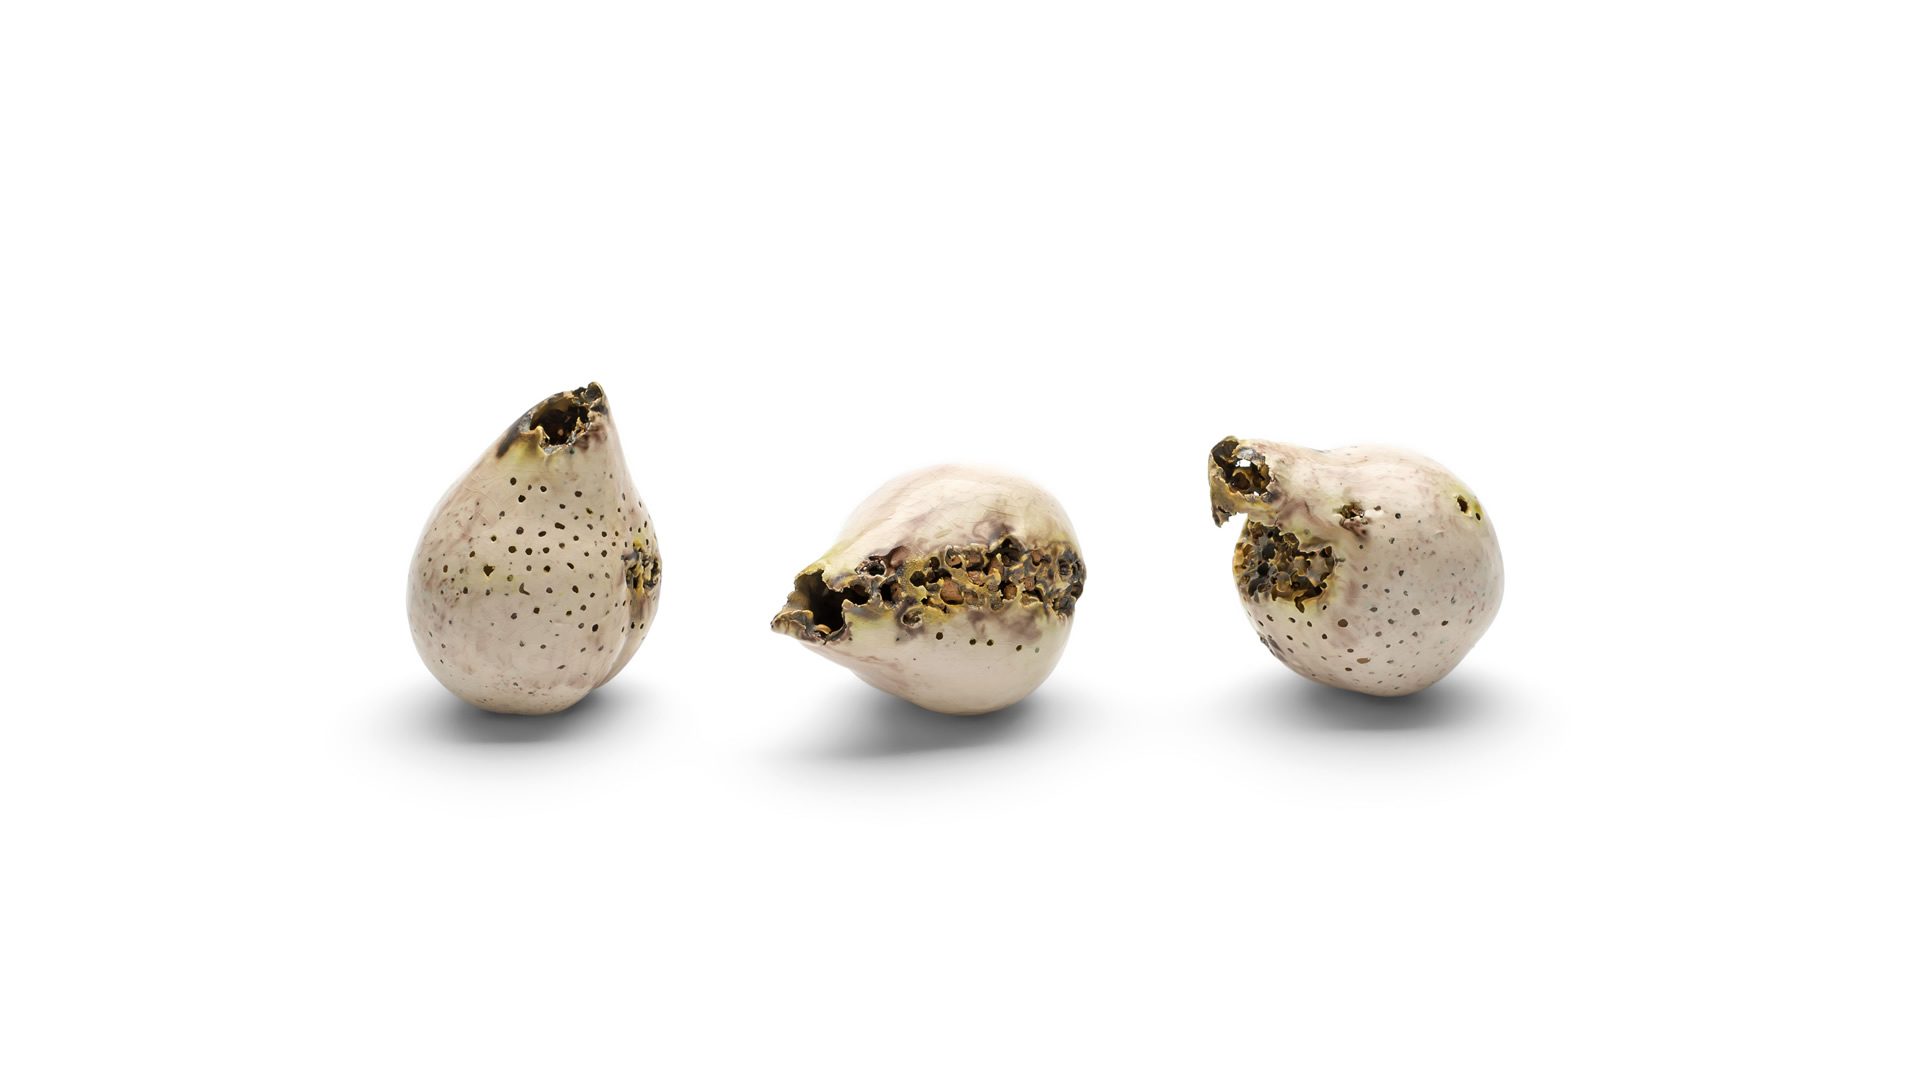 Three ceramic white pears with gold